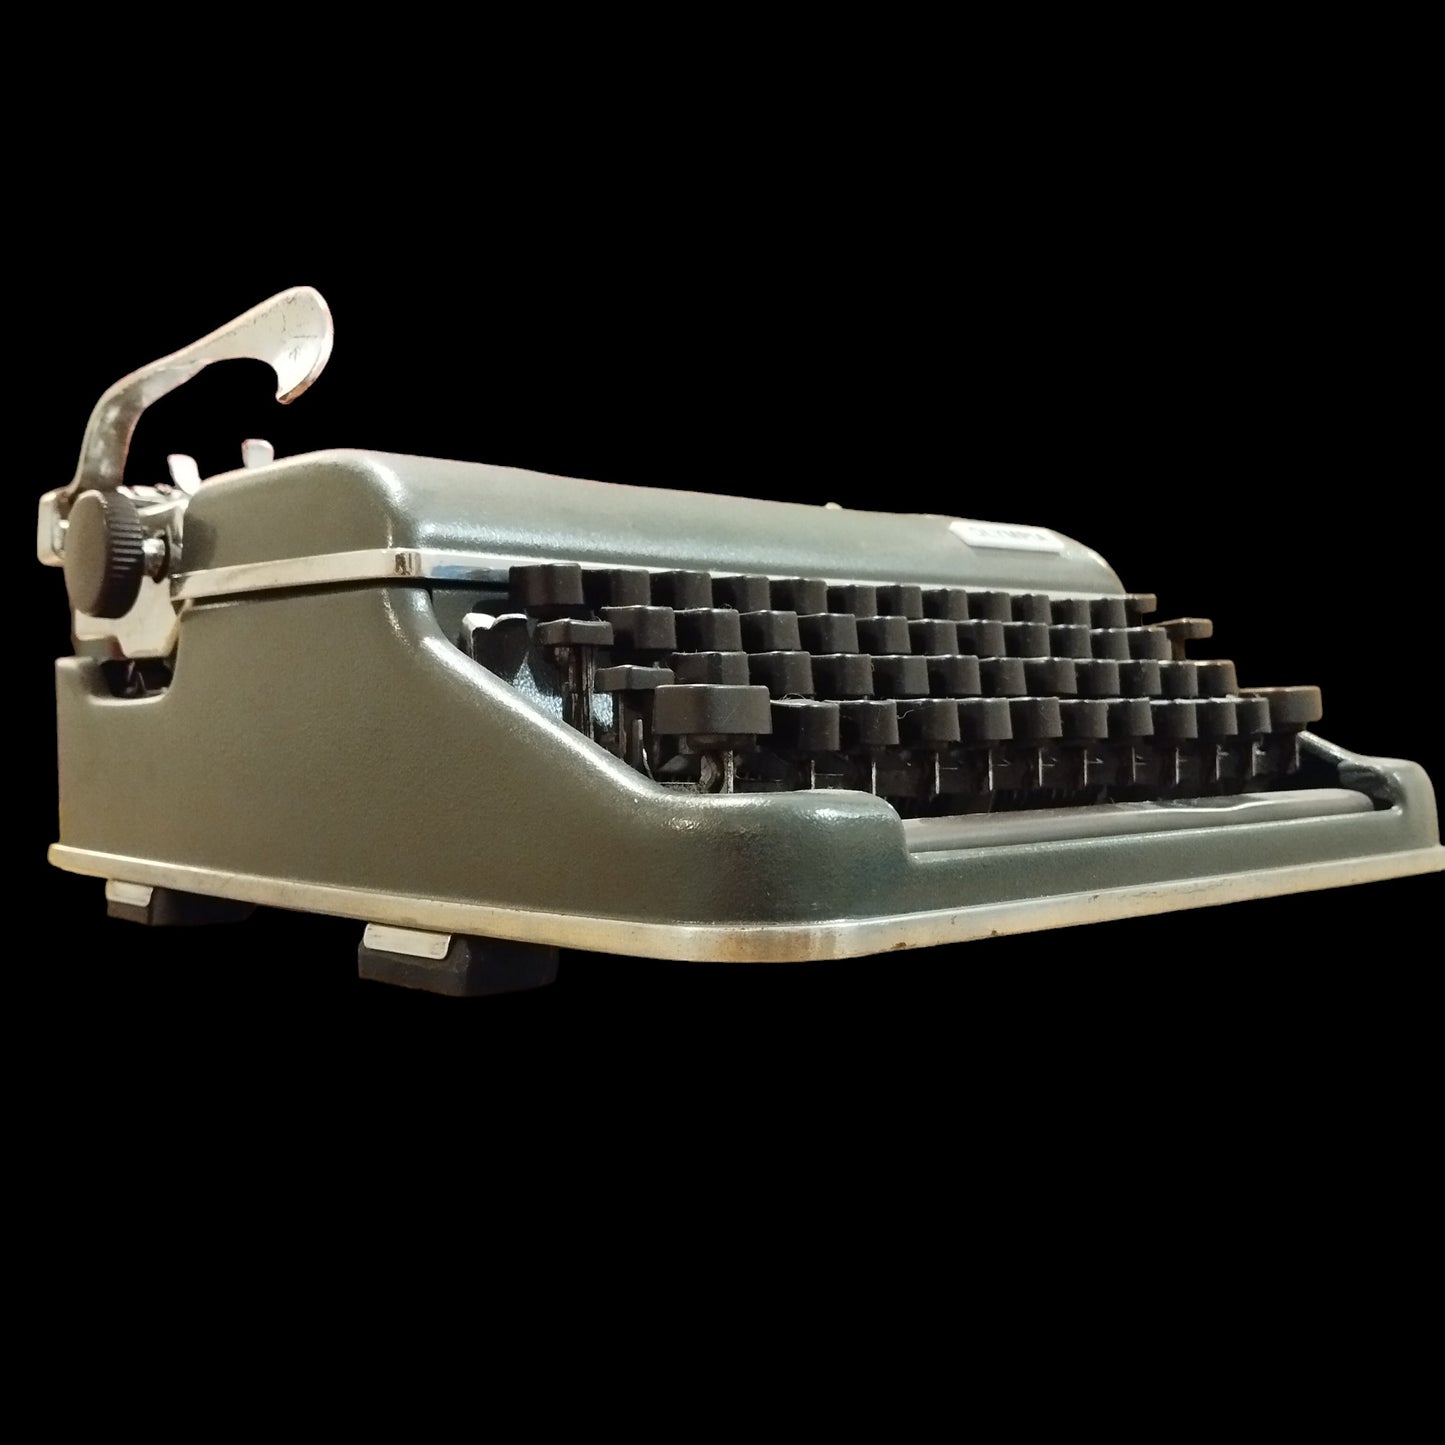 Image of Olympia Typewriter. Made in Germany. Available from universaltypewritercompany.in